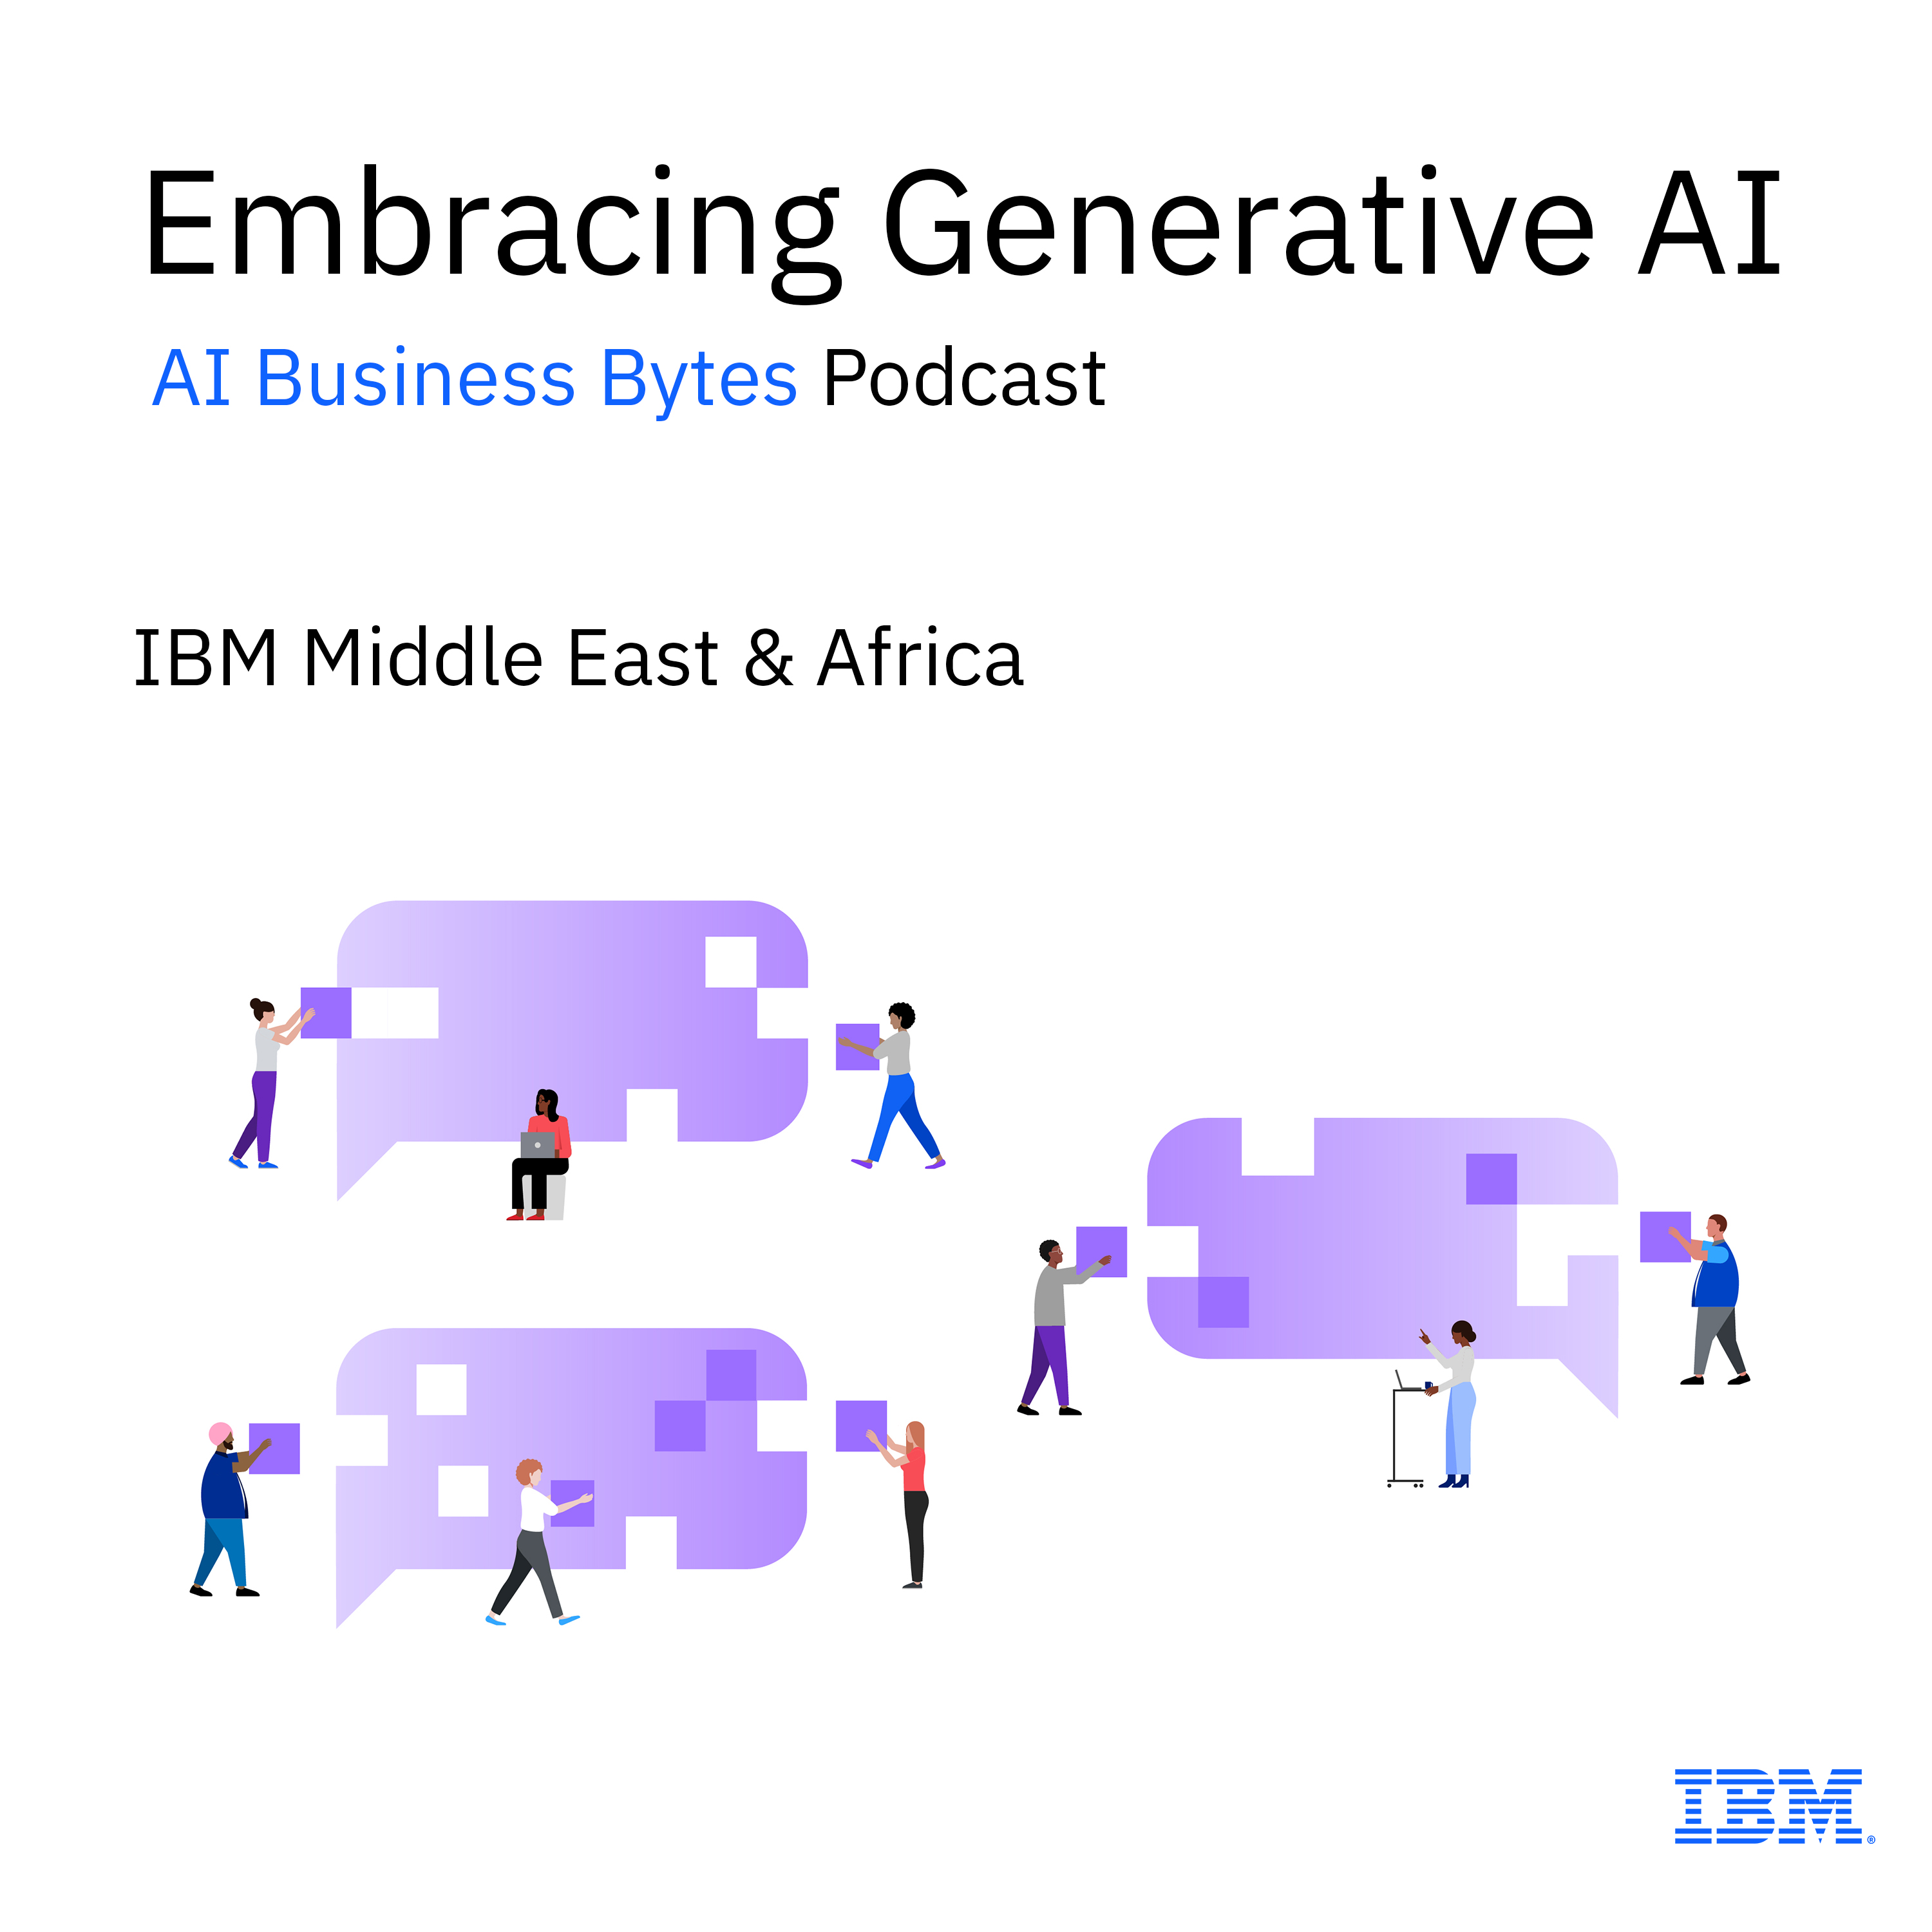 2. Embracing Generative AI to Unlock Value: A Developer Point of View